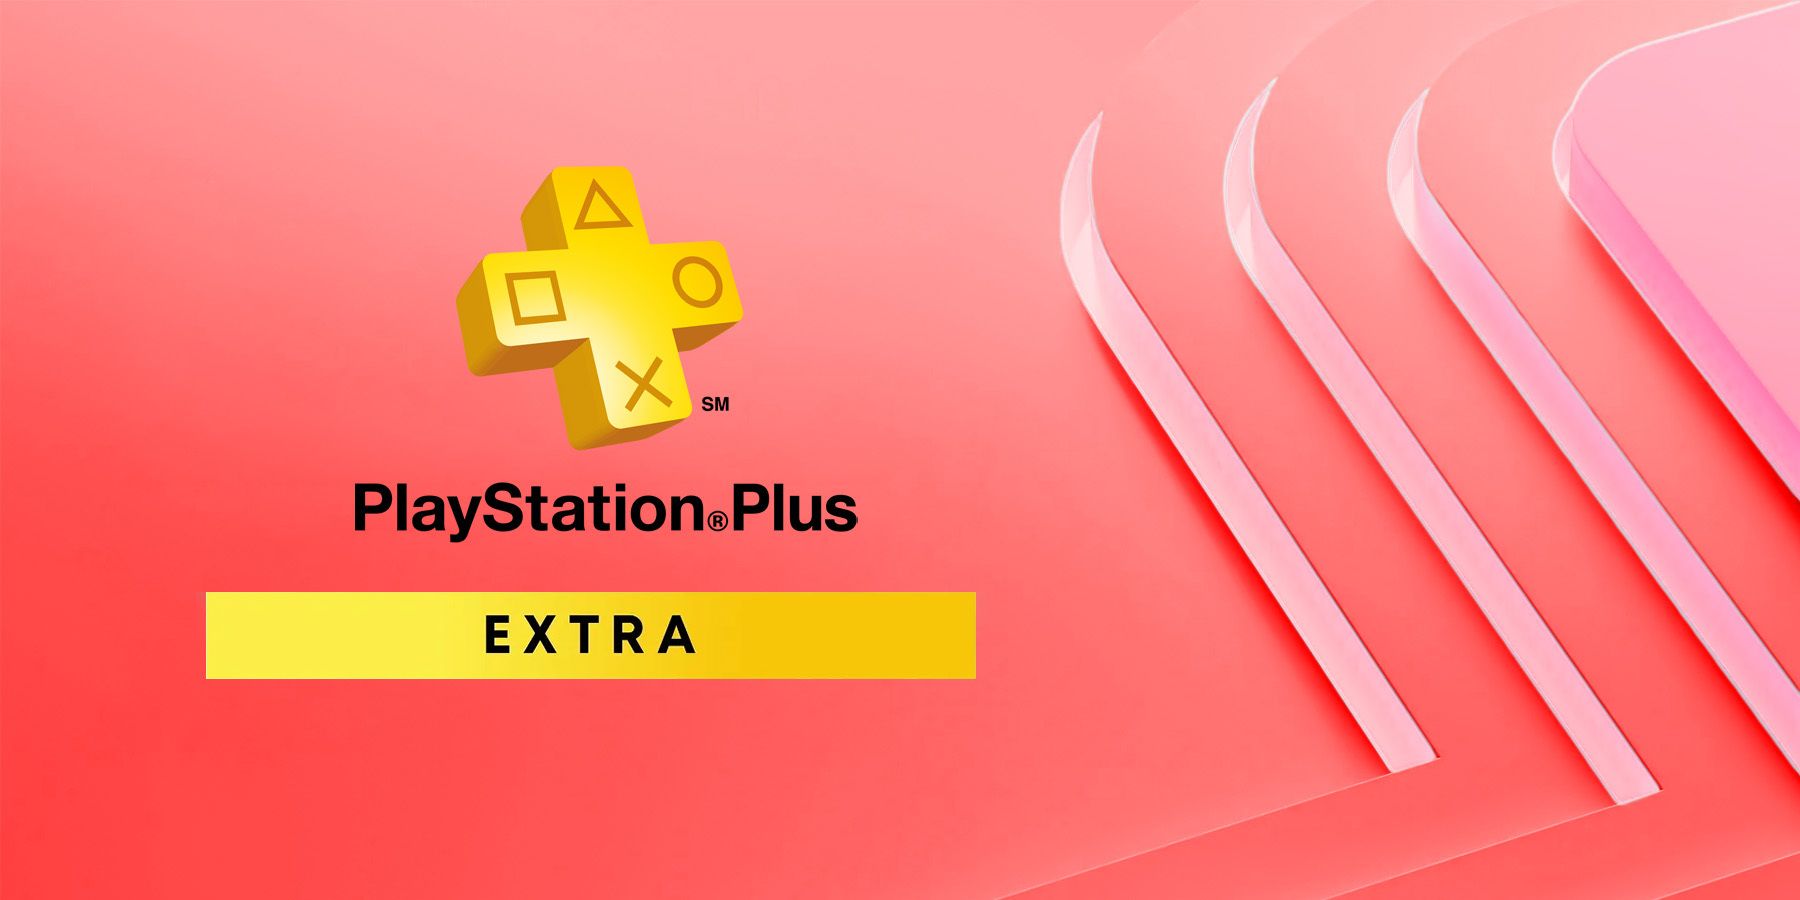 Every PlayStation Plus Extra & Premium Game Available February 2023